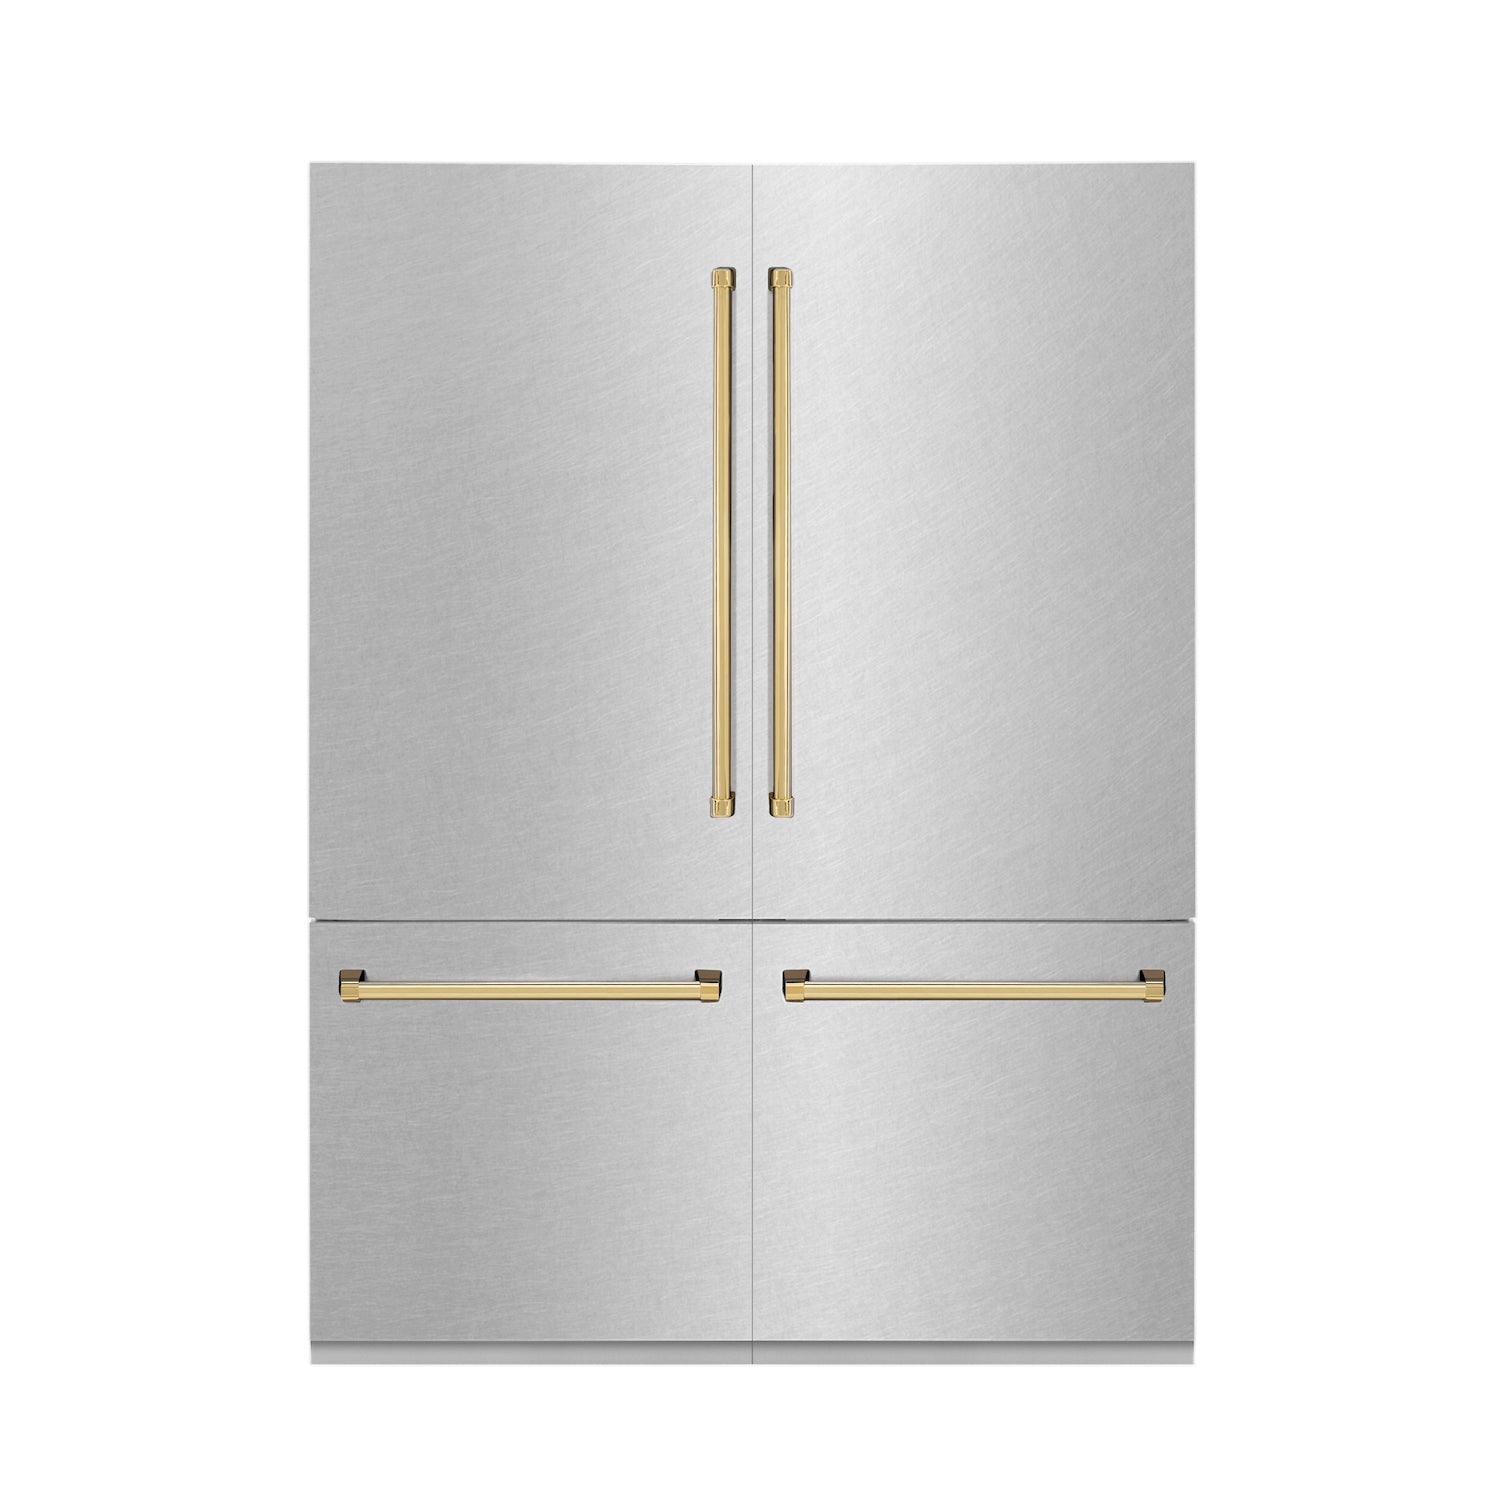 ZLINE Autograph Edition 60 in. 32.2 cu. ft. Built-in 4-Door French Door Refrigerator with Internal Water and Ice Dispenser in Fingerprint Resistant Stainless Steel with Polished Gold Accents (RBIVZ-SN-60-G) front, closed.